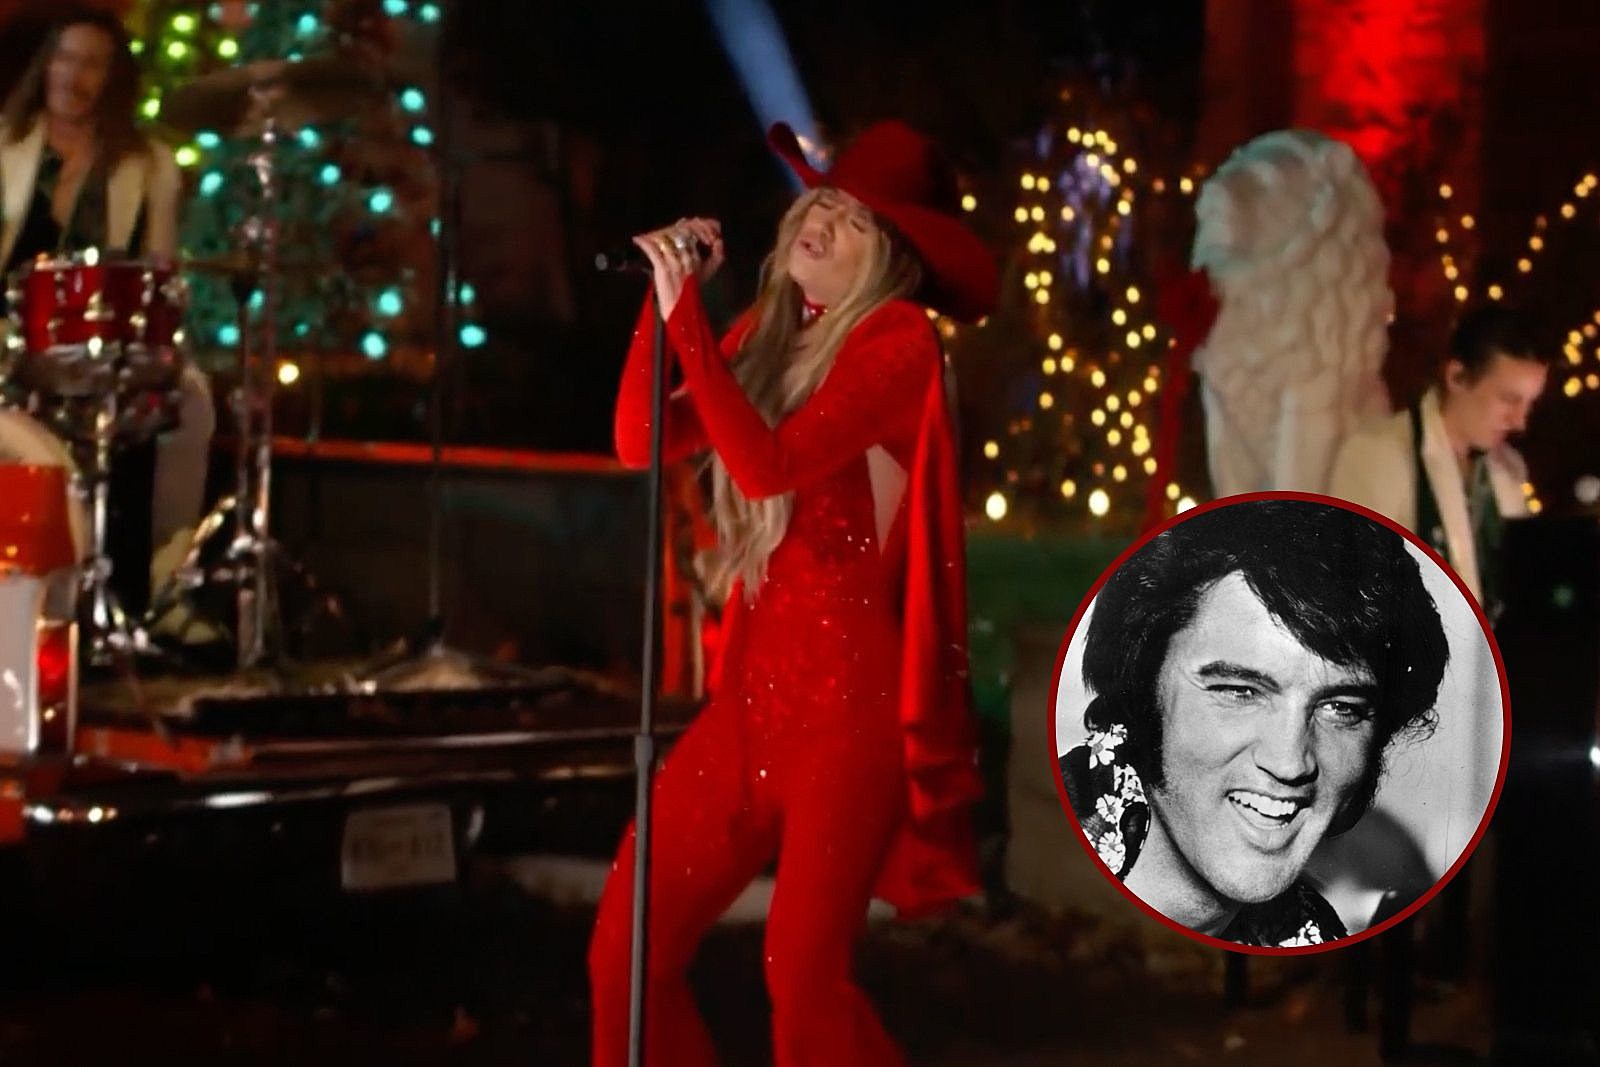 Lainey Wilson Gets Bluesy on 'Christmas at Graceland' [Watch]